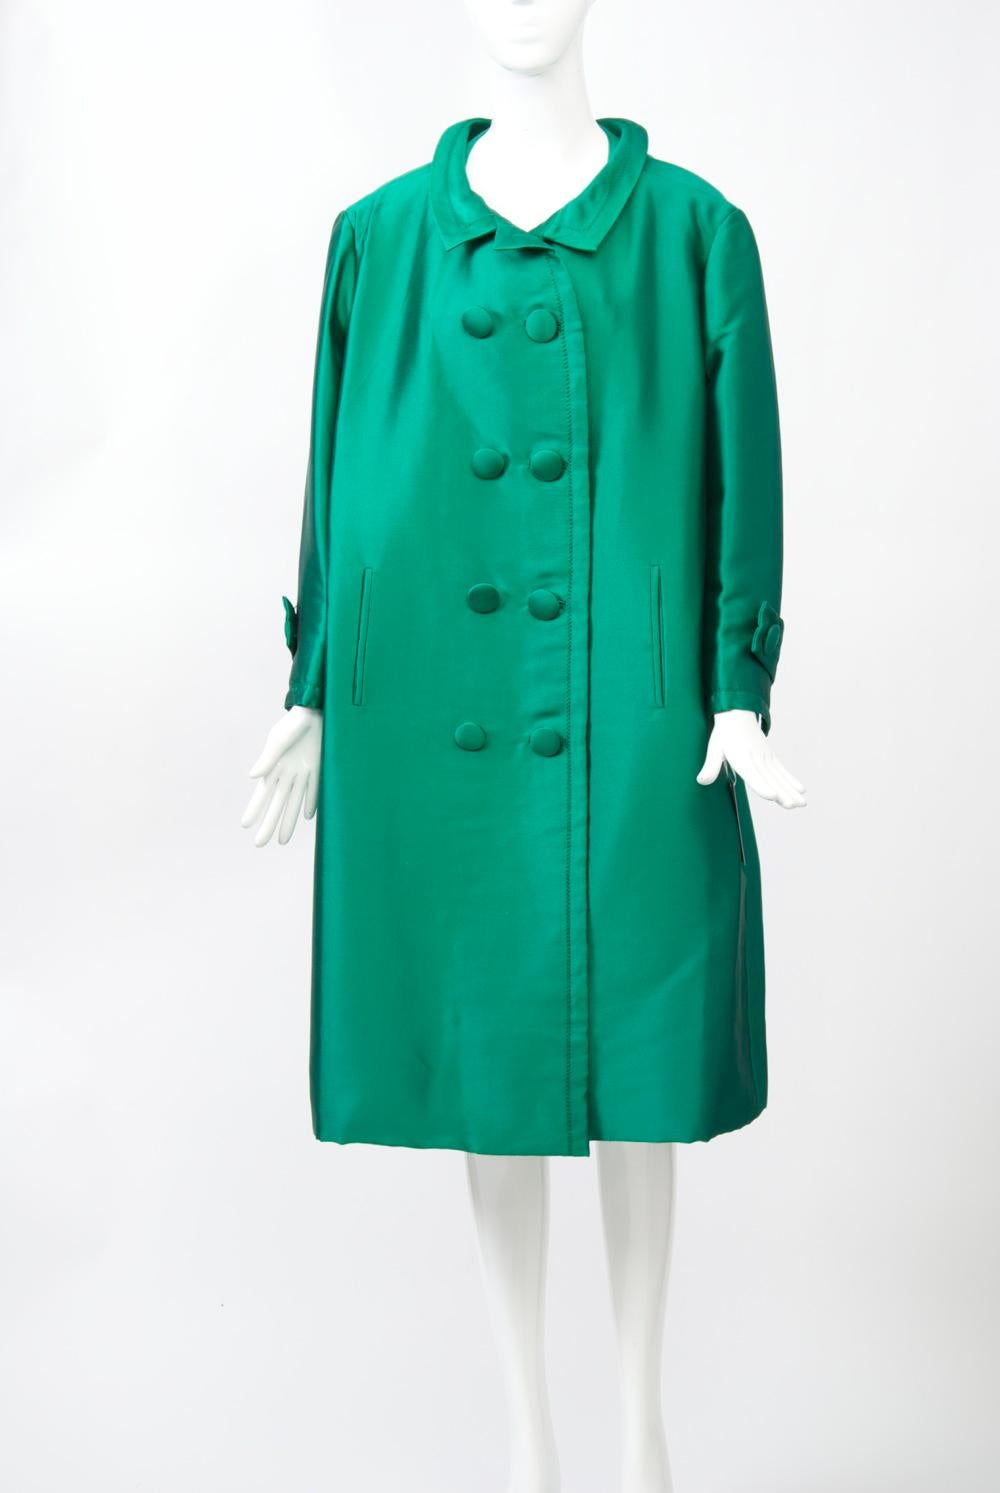 1960s emerald green silk evening coat by French couturier Jean Patou. Double breasted with self buttons and bound buttonholes, and small spread collar; topstitching throughout. Set-in, wrist-length sleeves with slit, tab and button. Slit pockets.